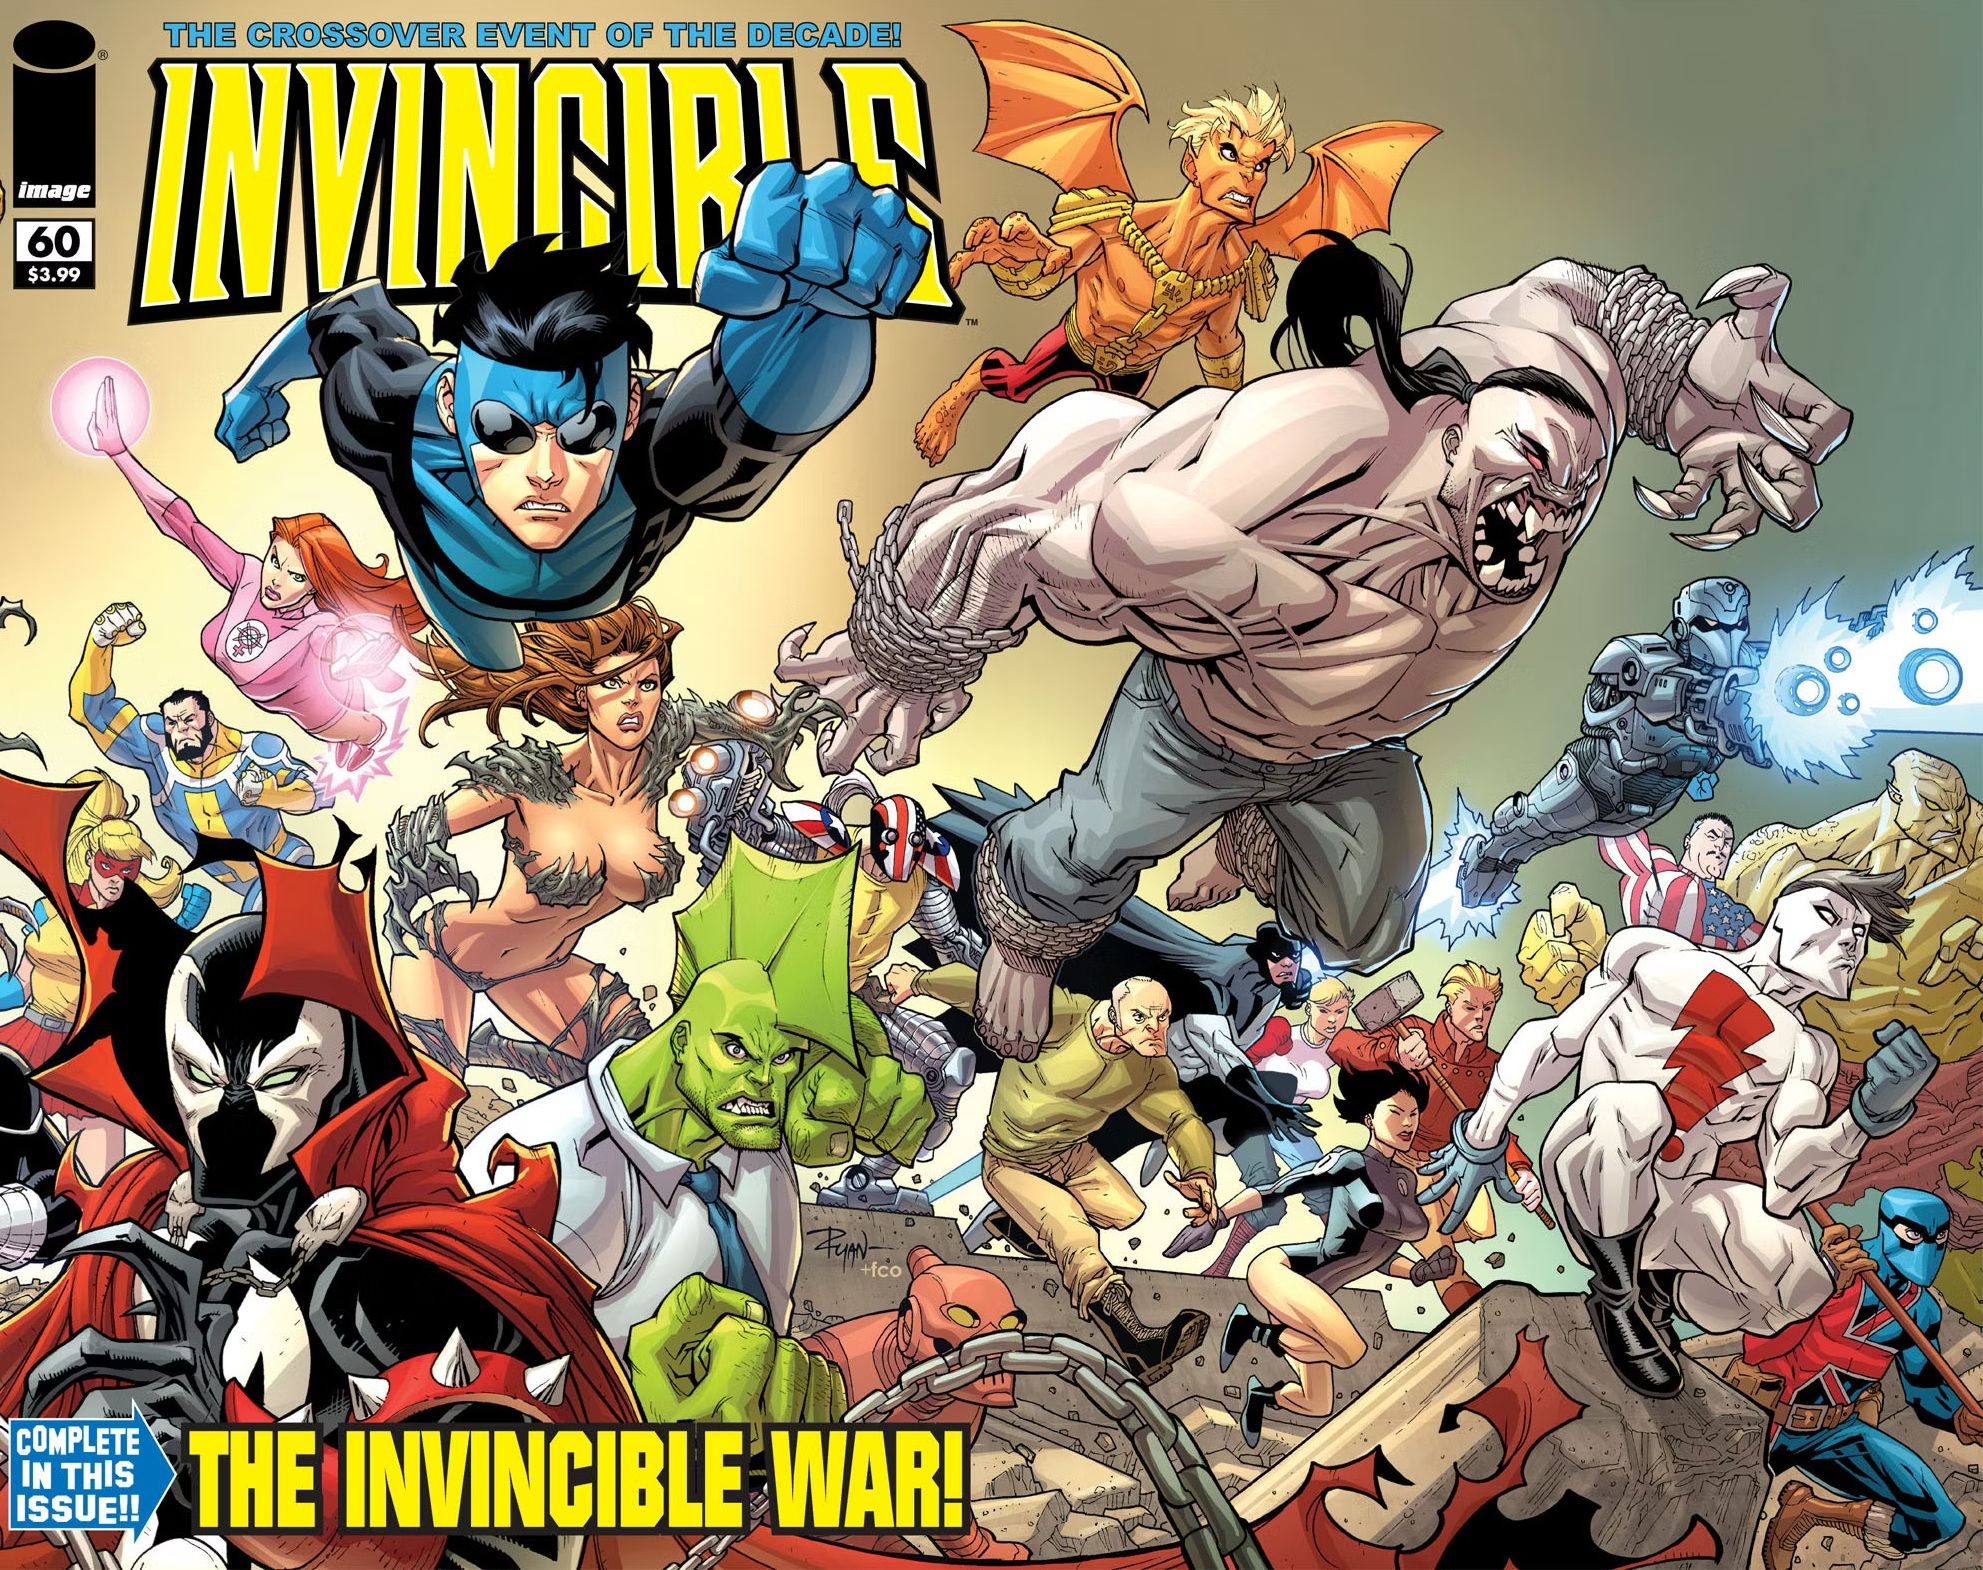 Invincible #60 wraparound cover (right side) featuring Image Comics heroes, led by Invincible, leaping into battle.